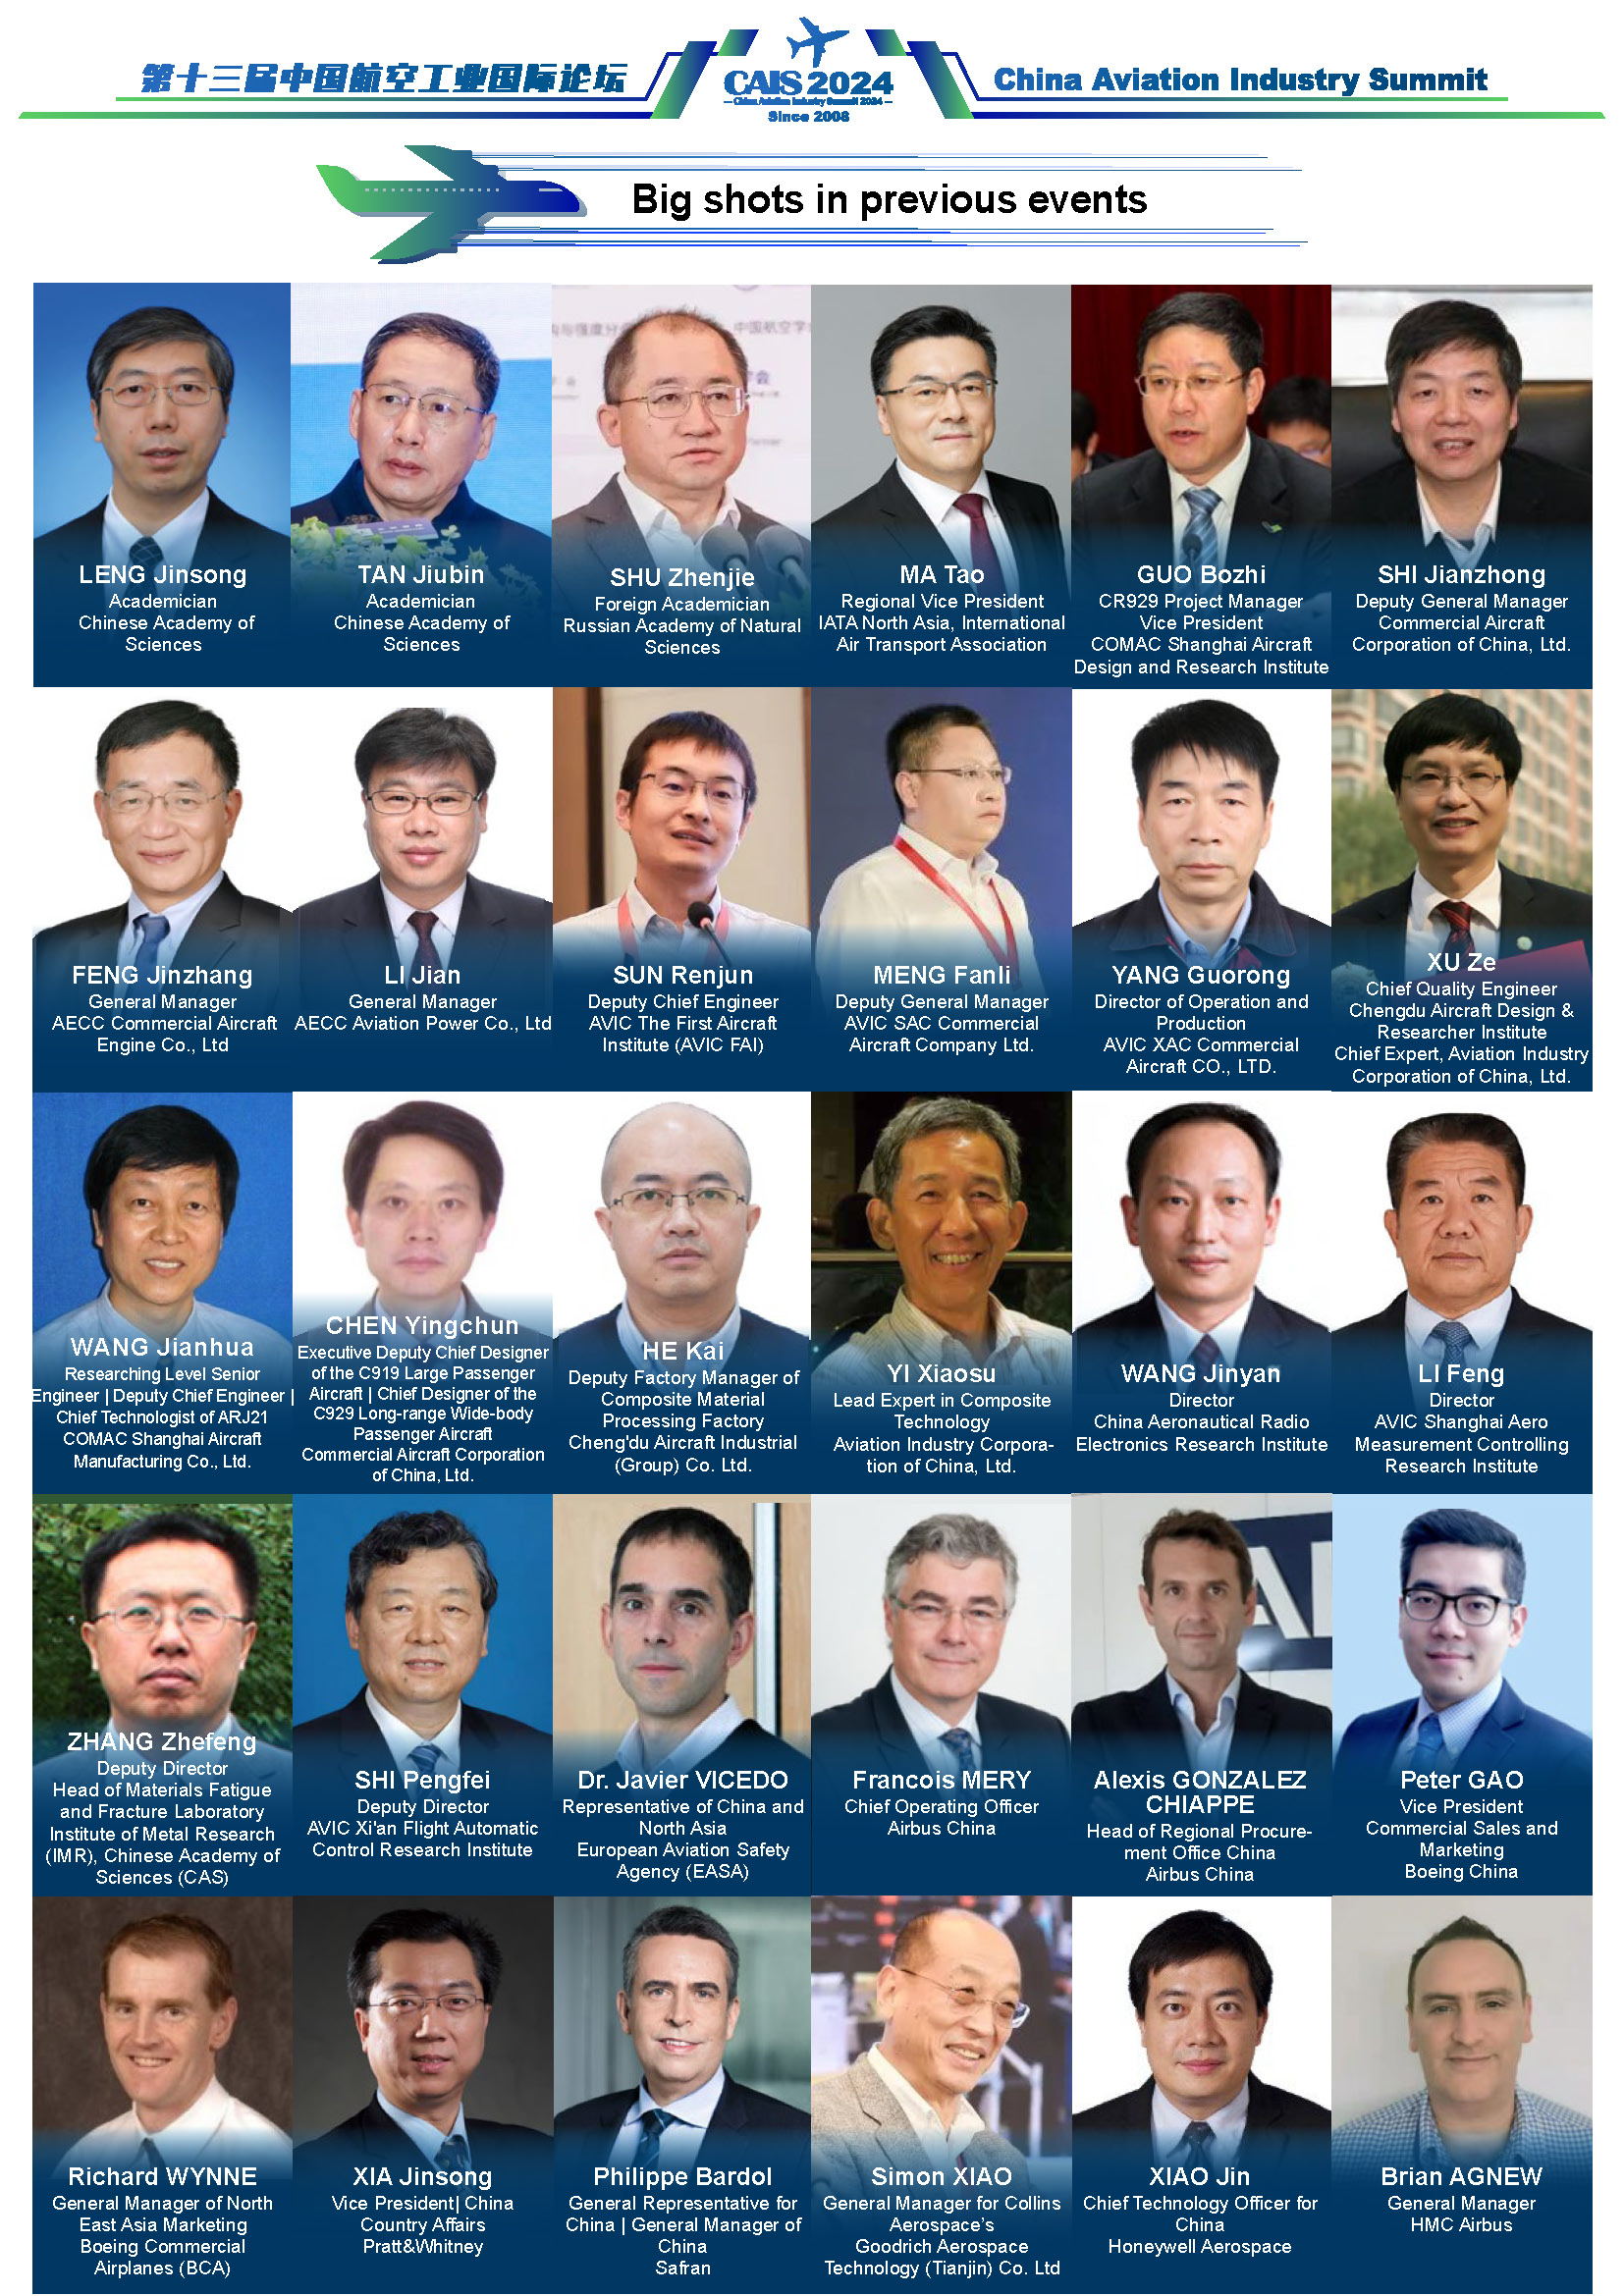 The 13th China Aviation Industry Summit 2024